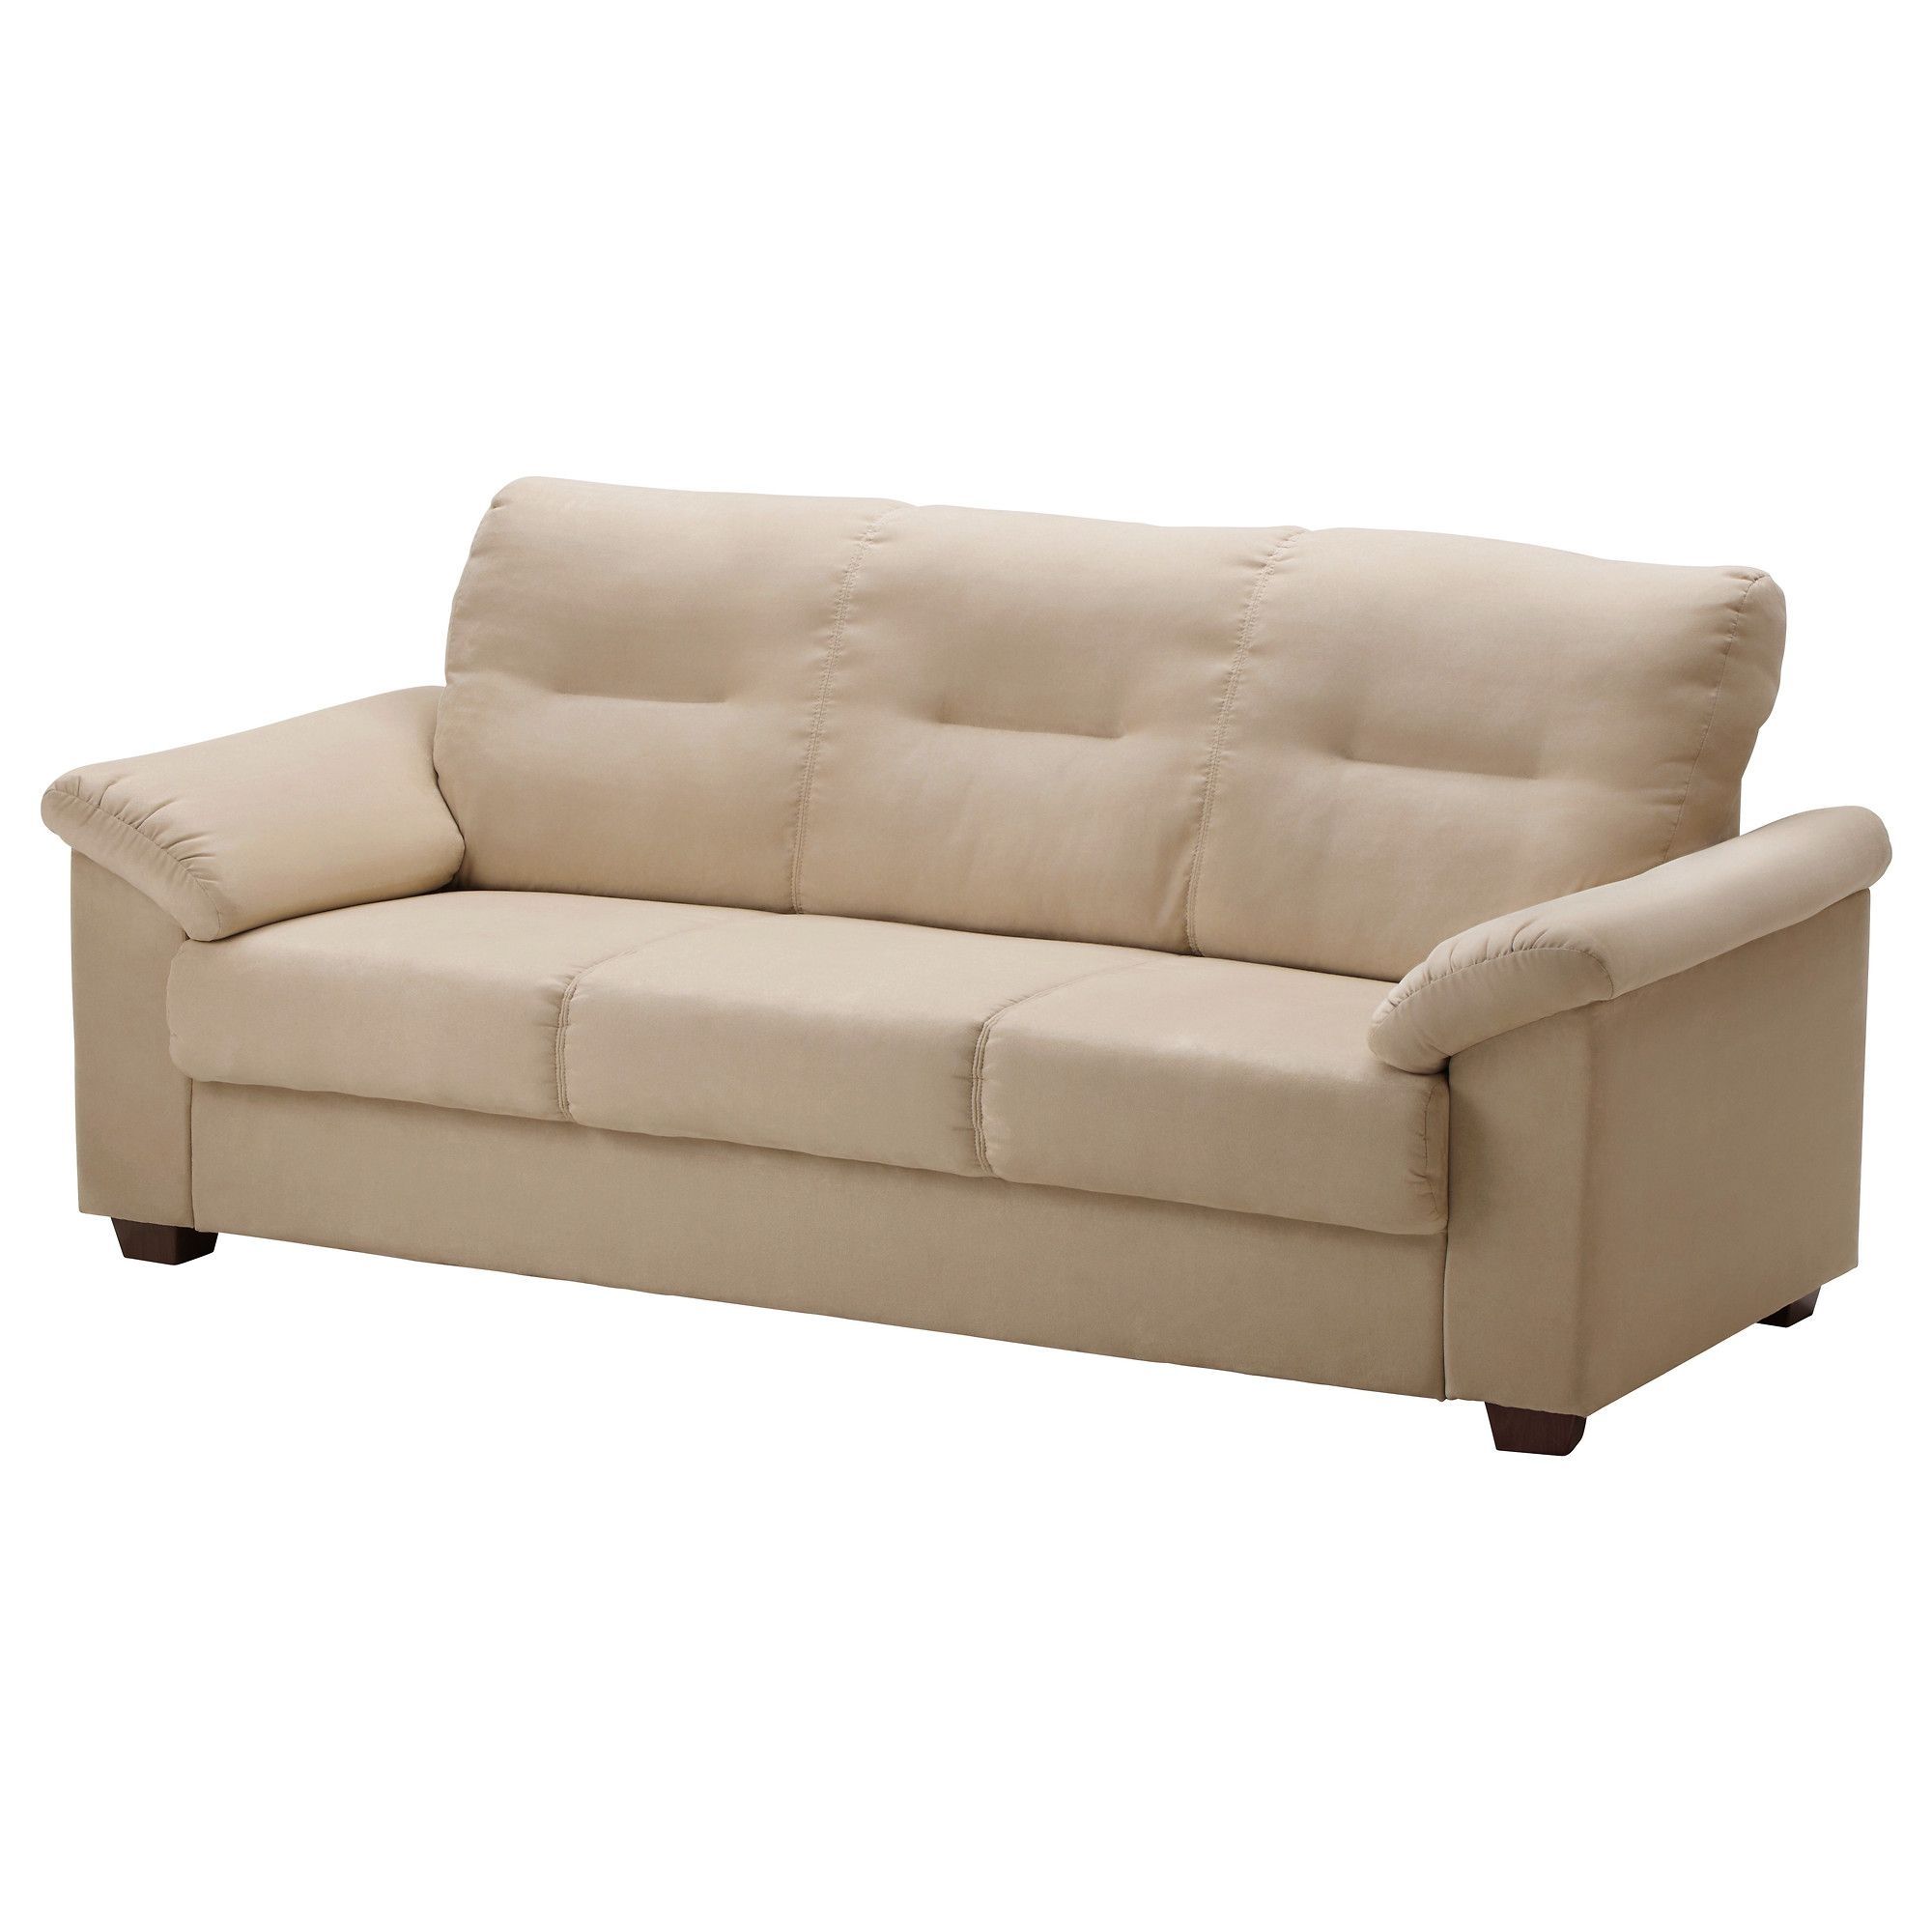 Ikea – Knislinge, Sofa, Kungsvik Sand, , The High Back Provides Good Within Taron 3 Piece Power Reclining Sectionals With Right Facing Console Loveseat (View 8 of 20)